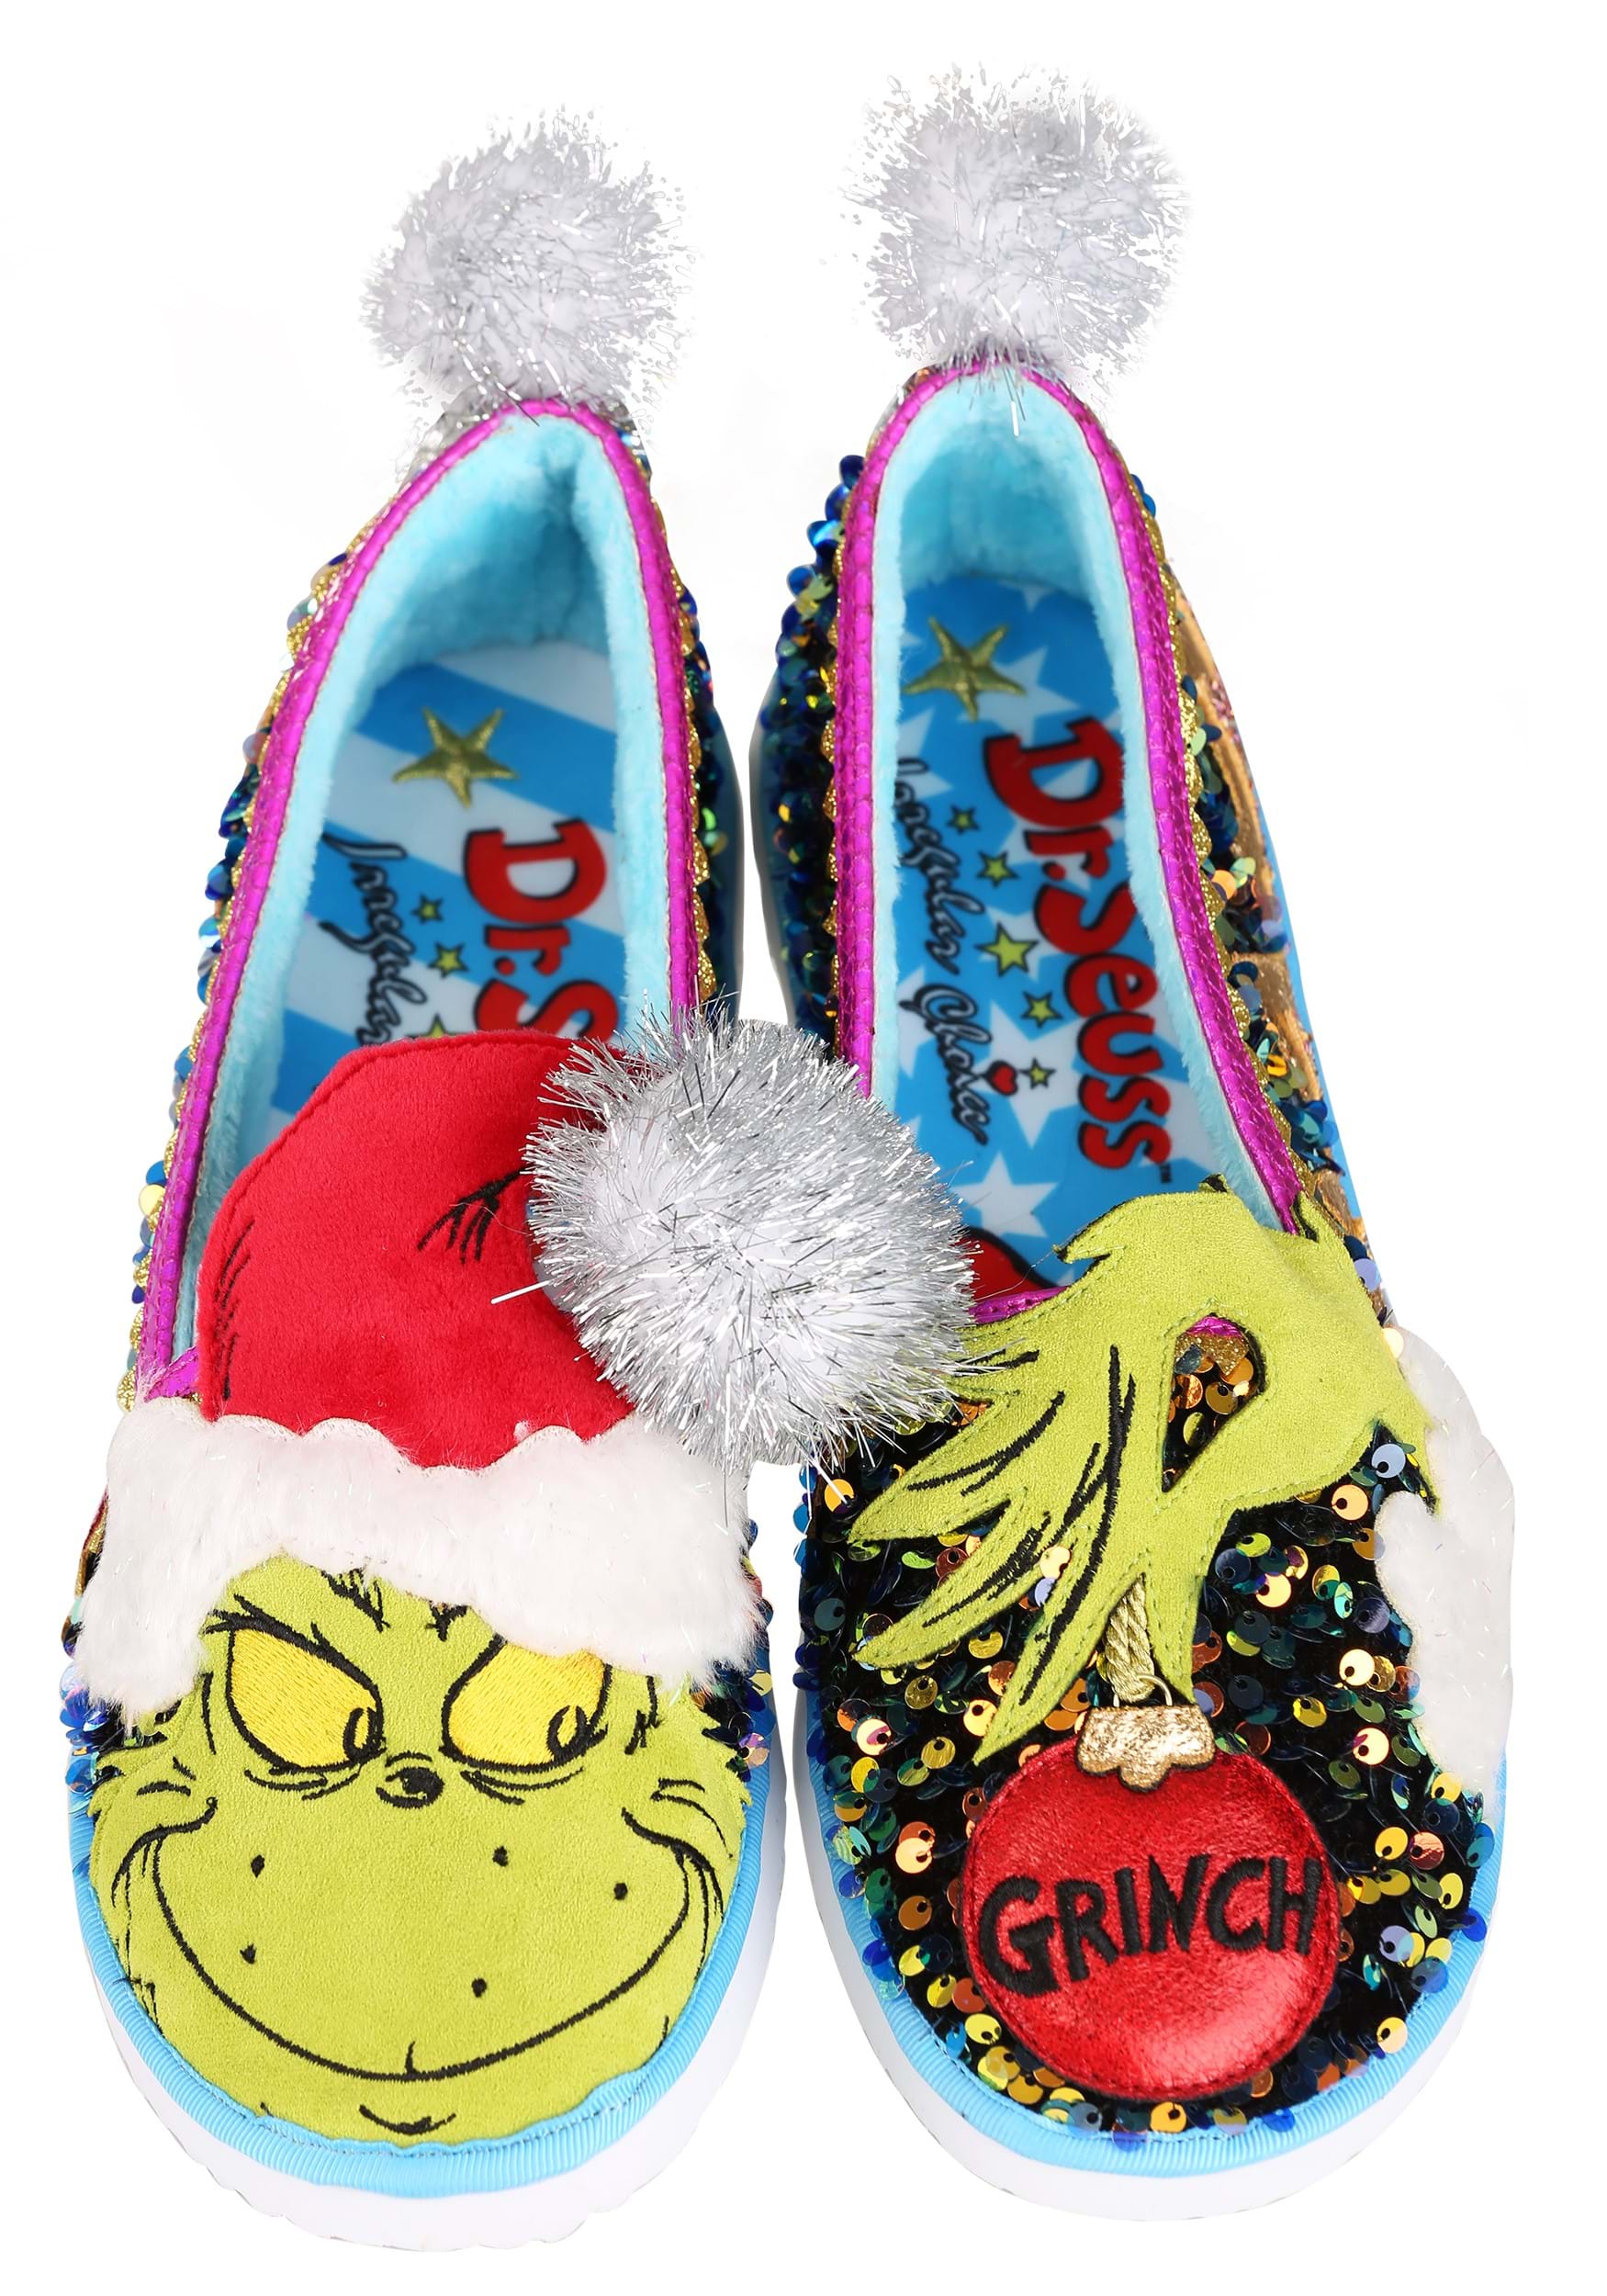 The Grinch Rebel With a Cause Irregular Choice Slippers